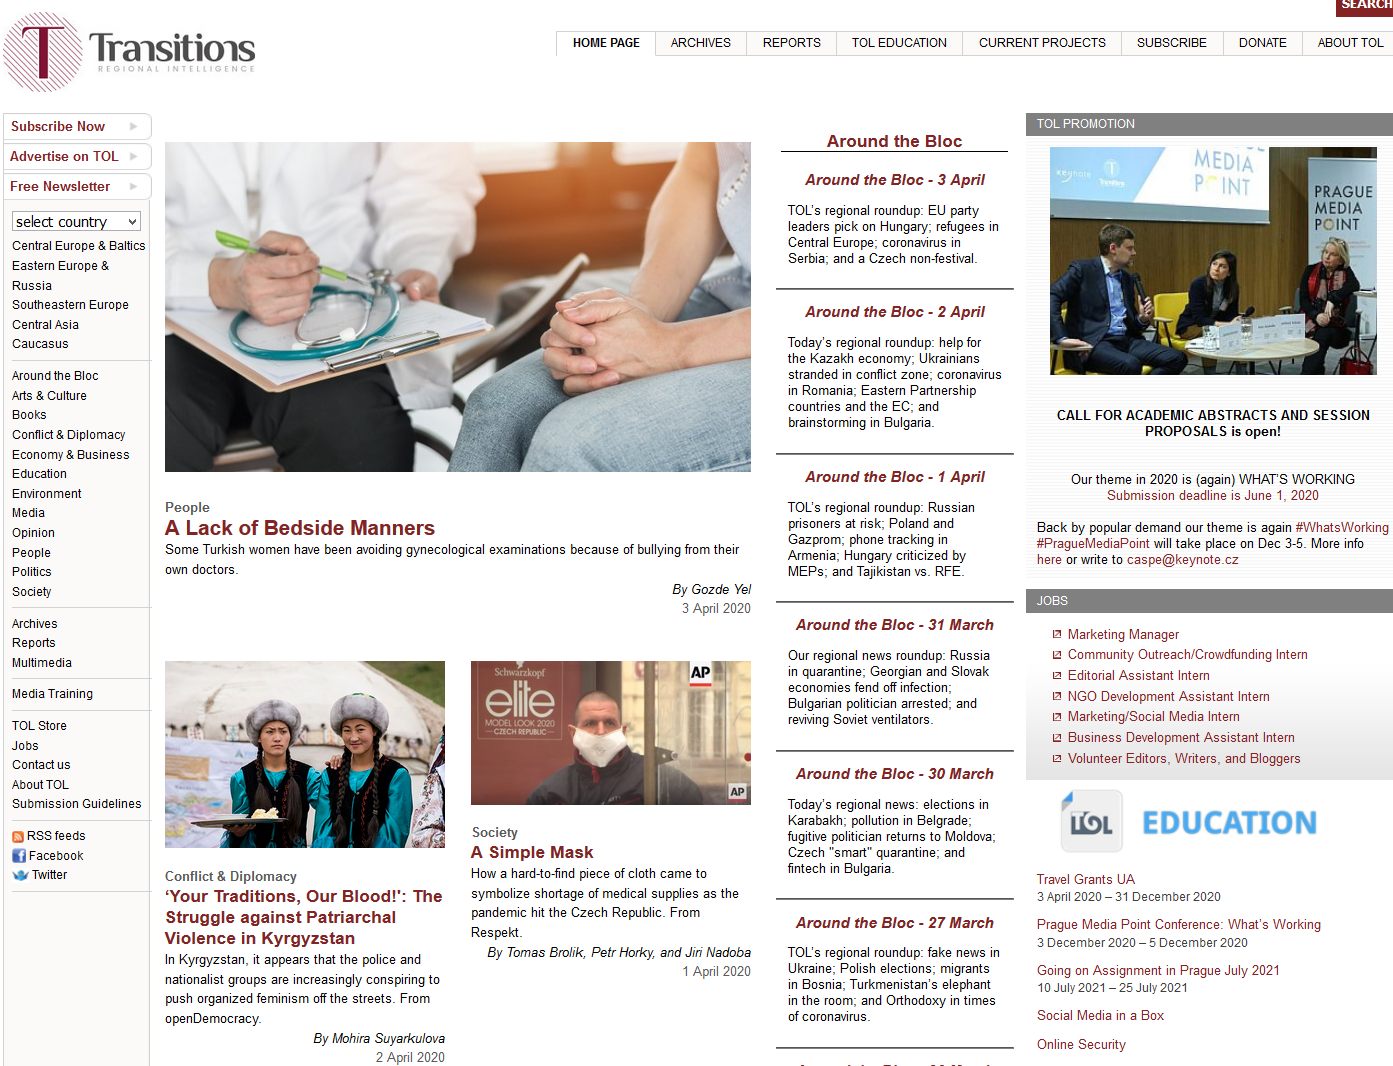 Transitions Online_People-A Lack of Bedside Manners Cover Image